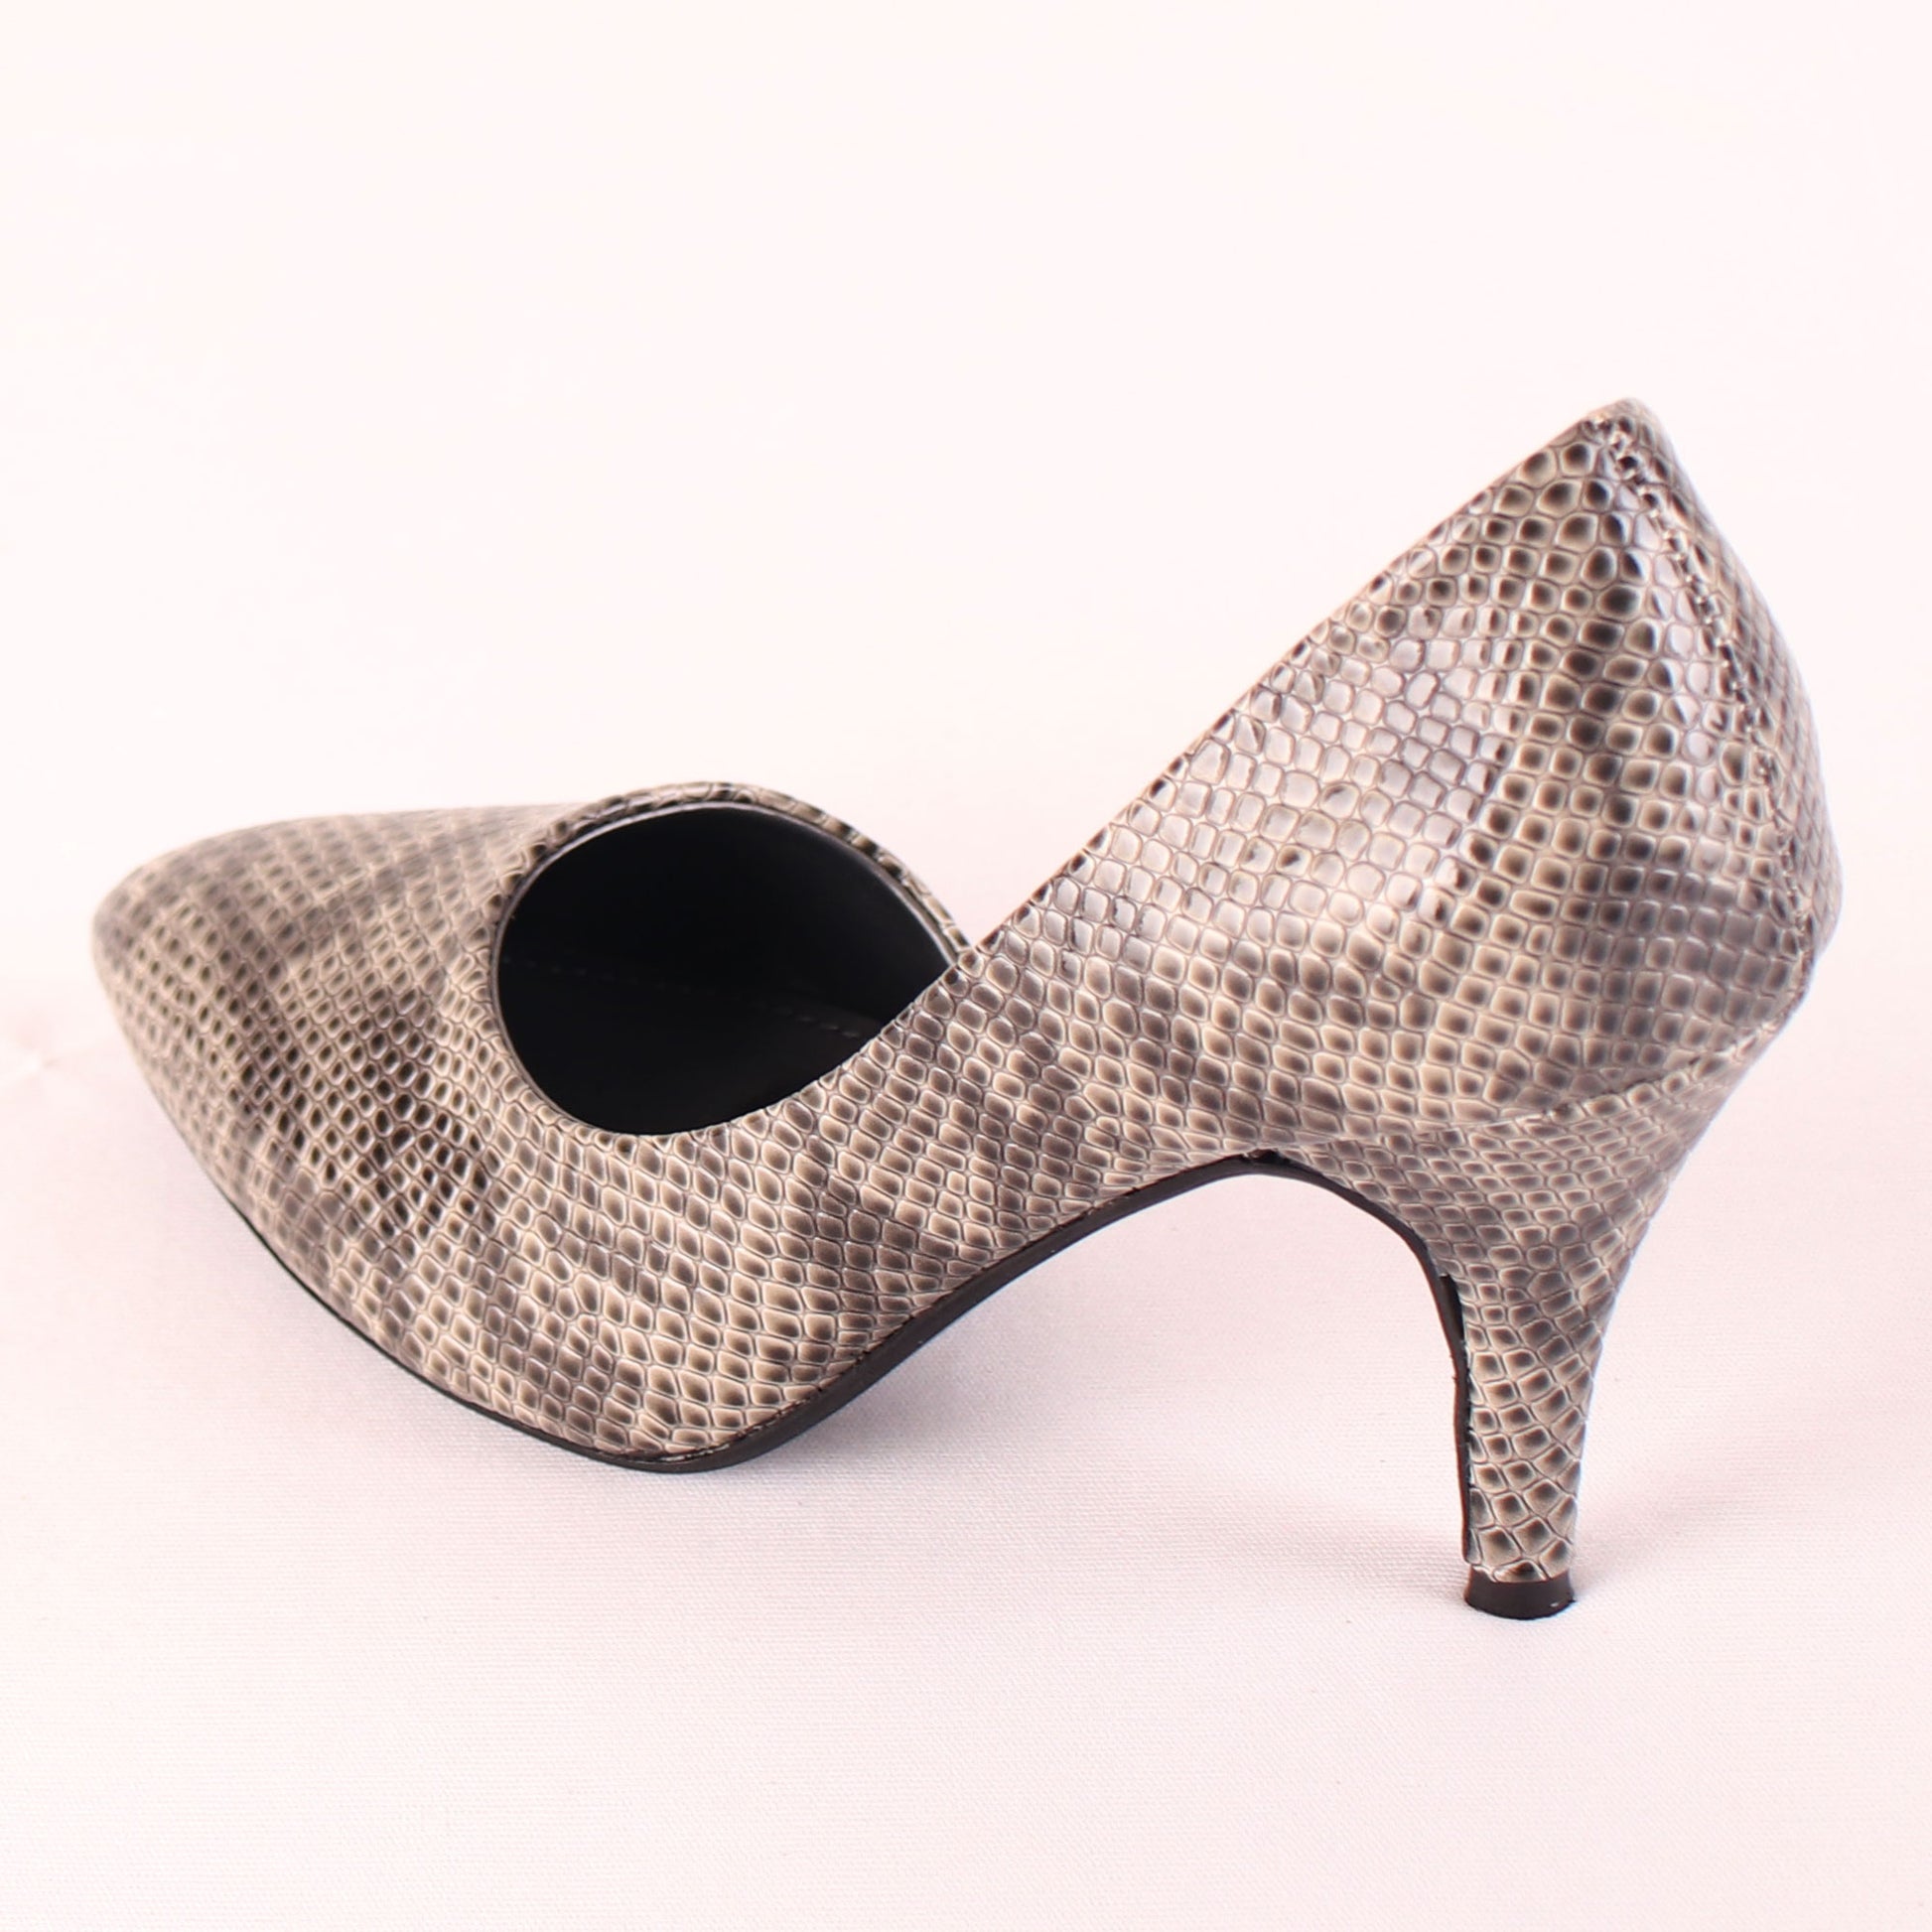 Foot Wear,The Awe-inspiring Snake Printed D'Orsay Pumps in Grey - Cippele Multi Store